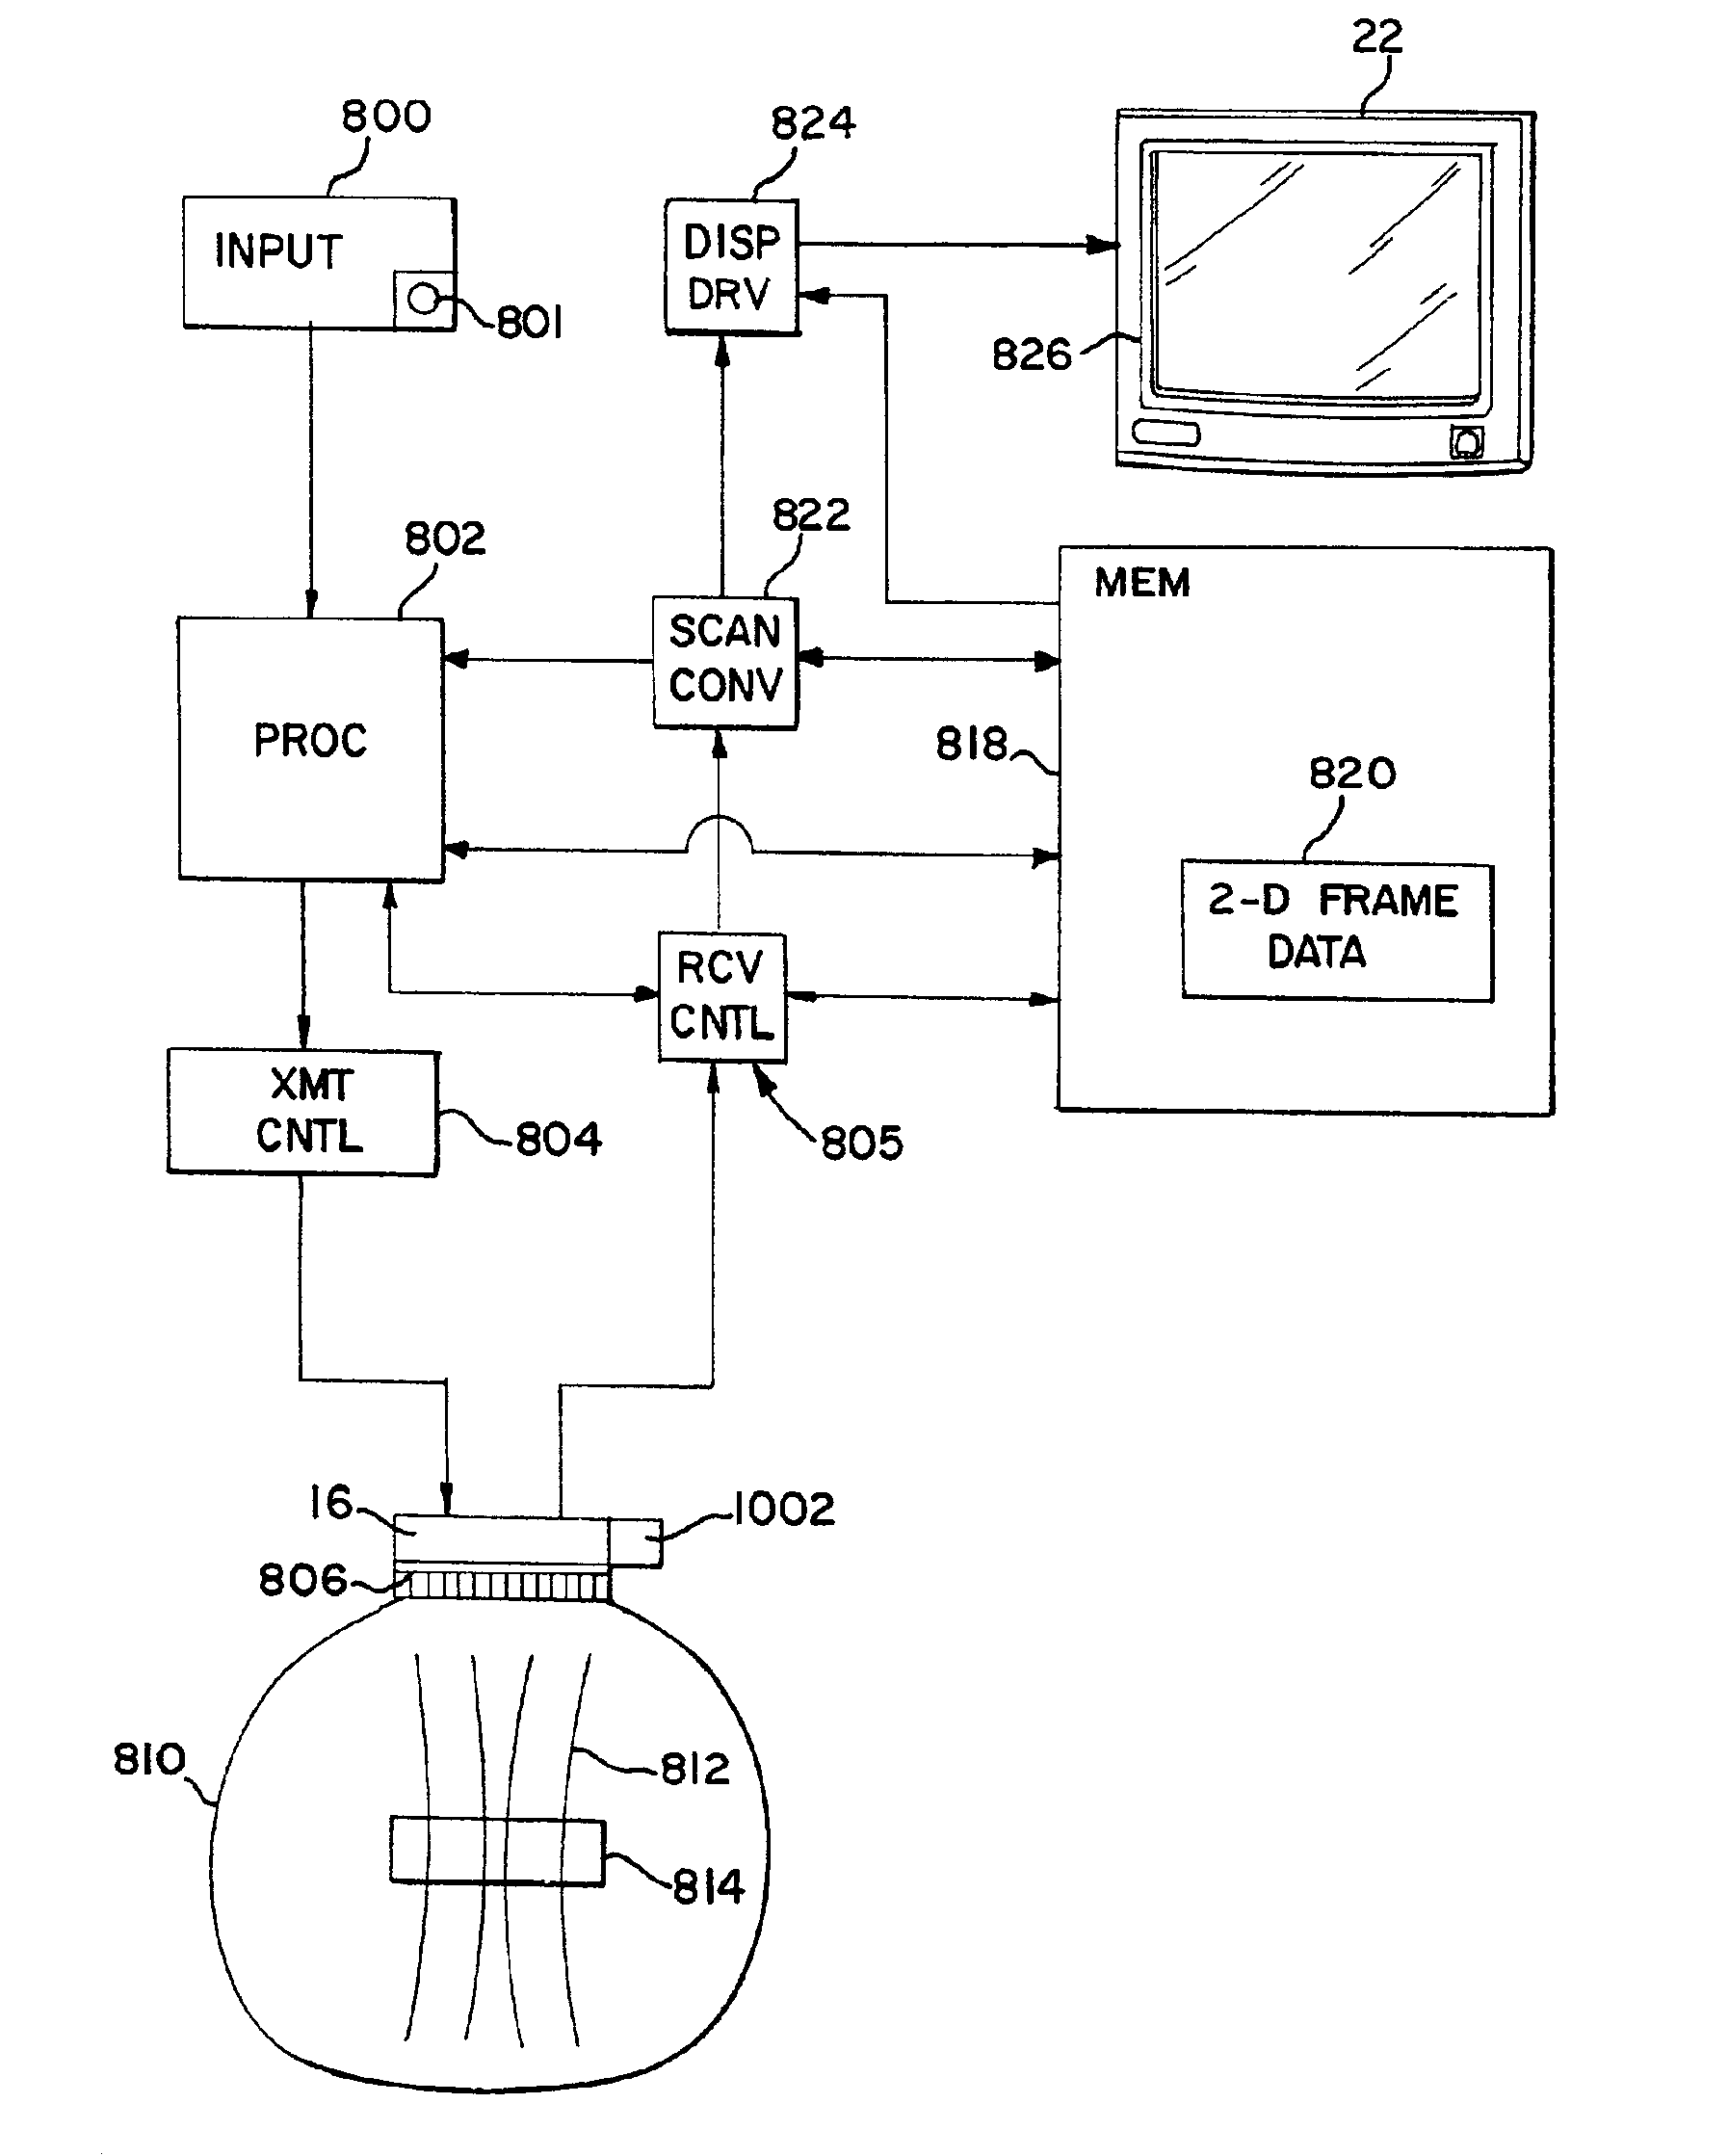 Compound image display system and method